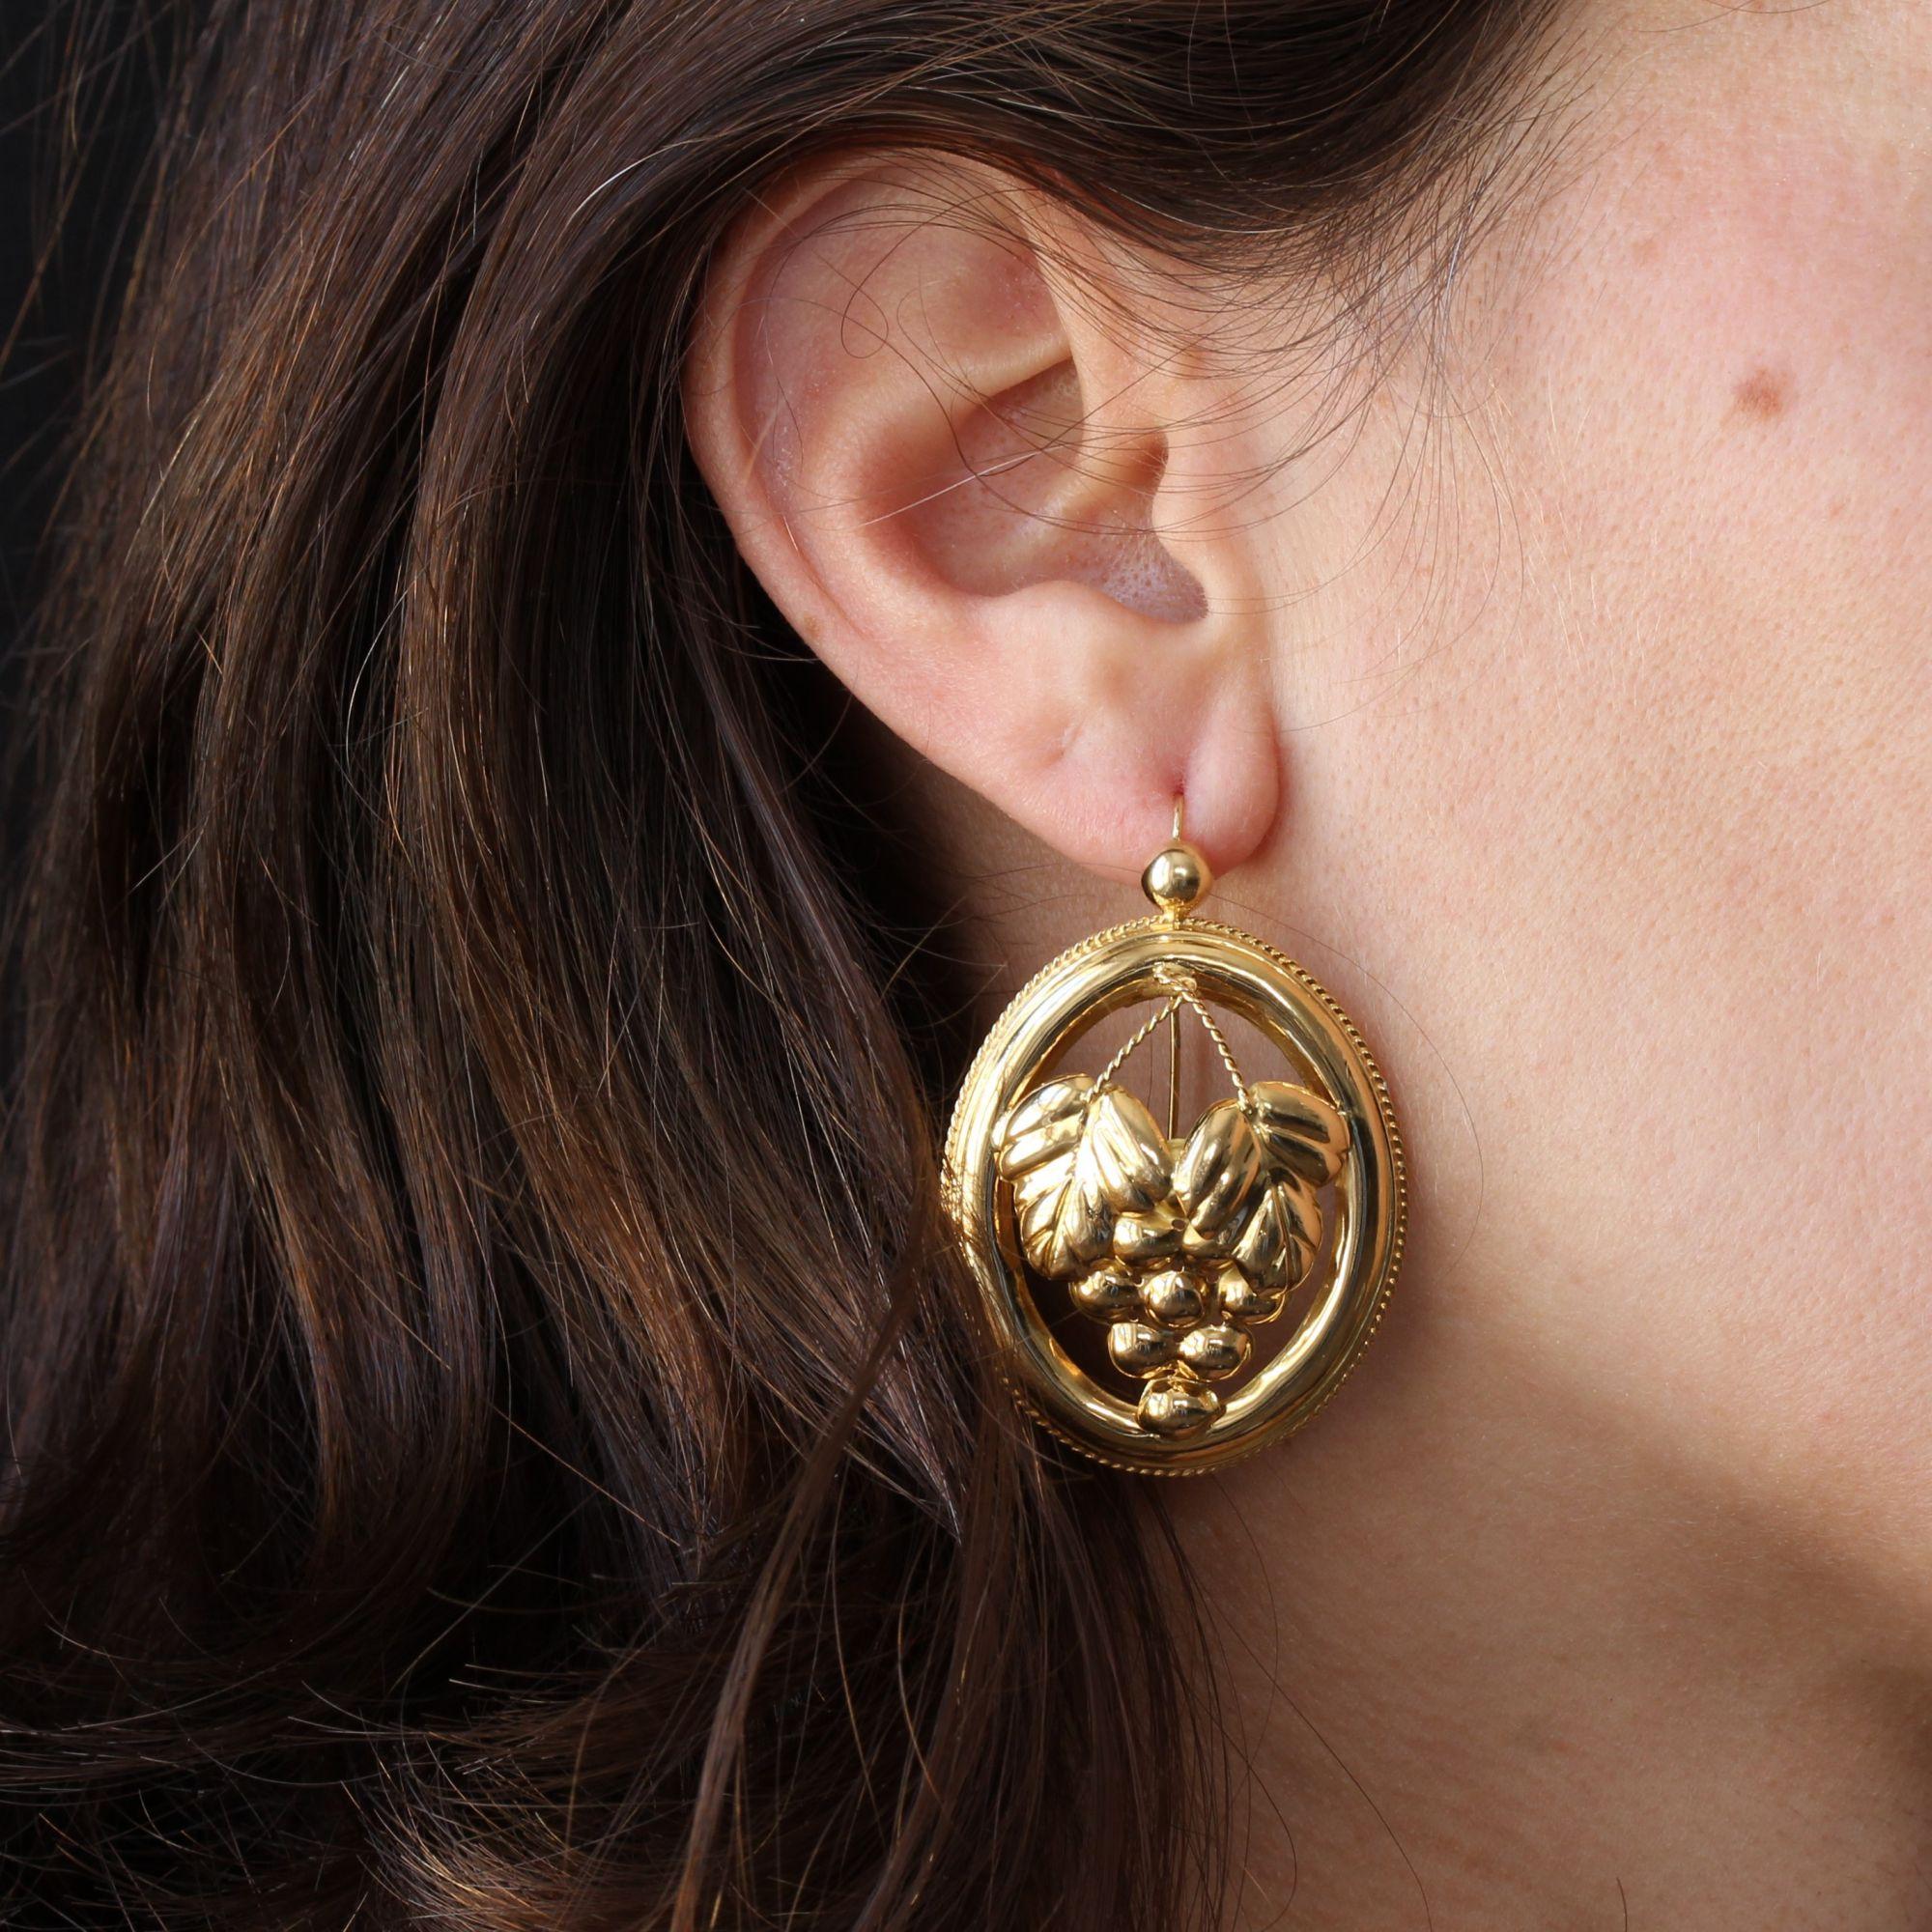 For pierced ears.
Earrings in 18 karat yellow gold, eagle head hallmark.
Imposing lever- back earrings of oval form, these antique earrings are openwork of a bunch of grapes and surmounted by a pearl. All around is bordered by a thin cord. The hook